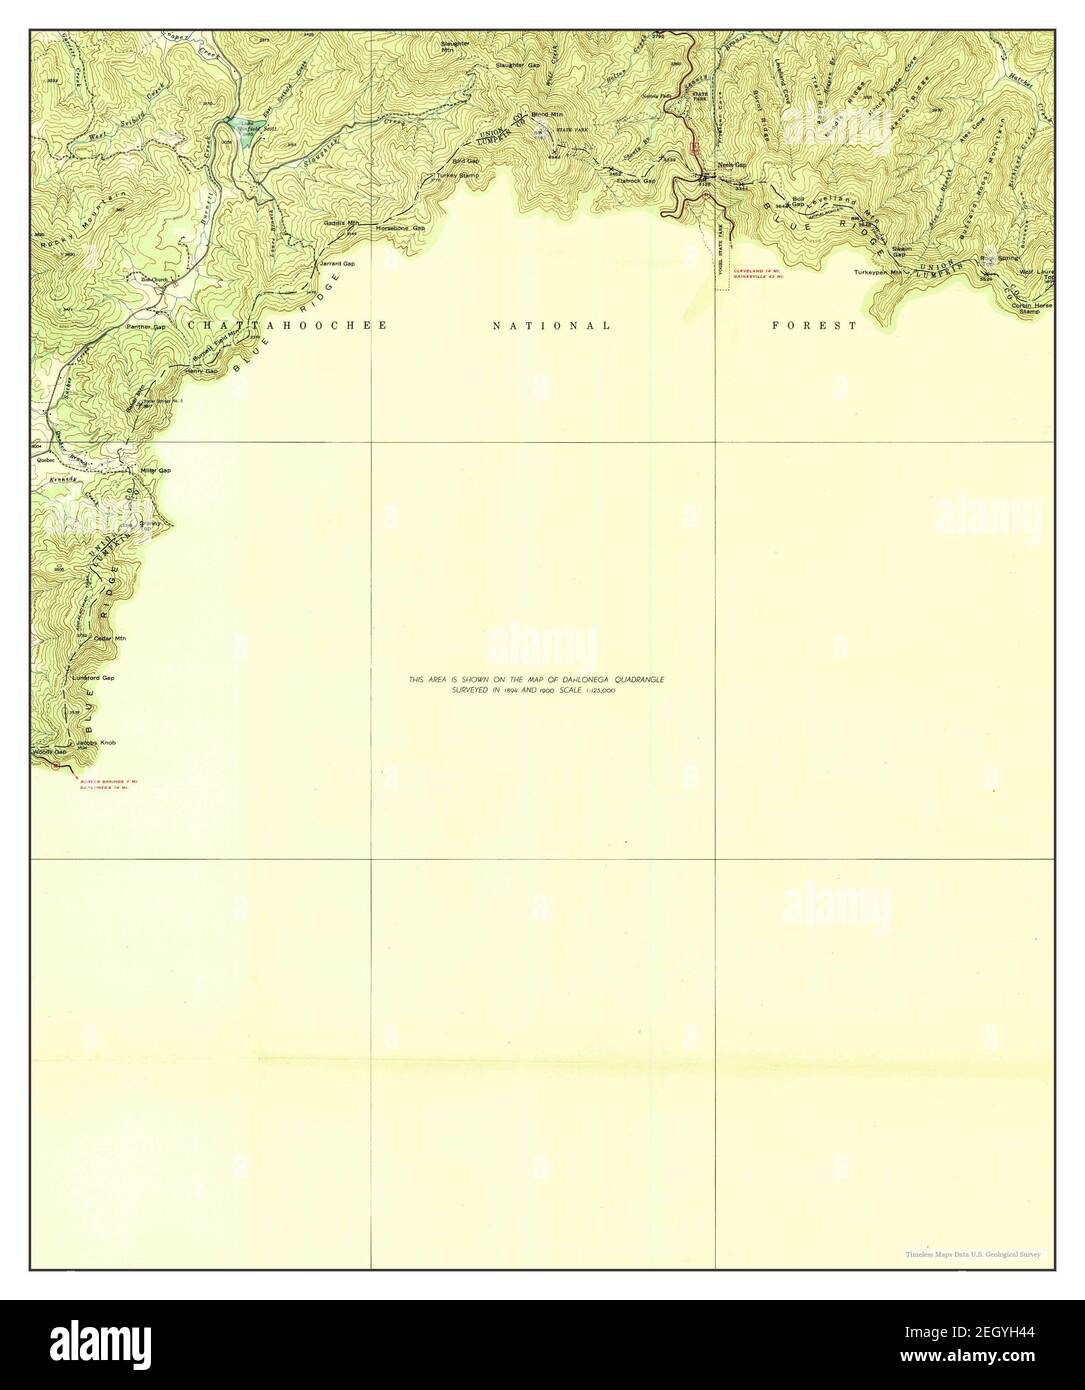 Neels Gap, Georgia, map 1938, 1:24000, United States of America by Timeless Maps, data U.S. Geological Survey Foto Stock